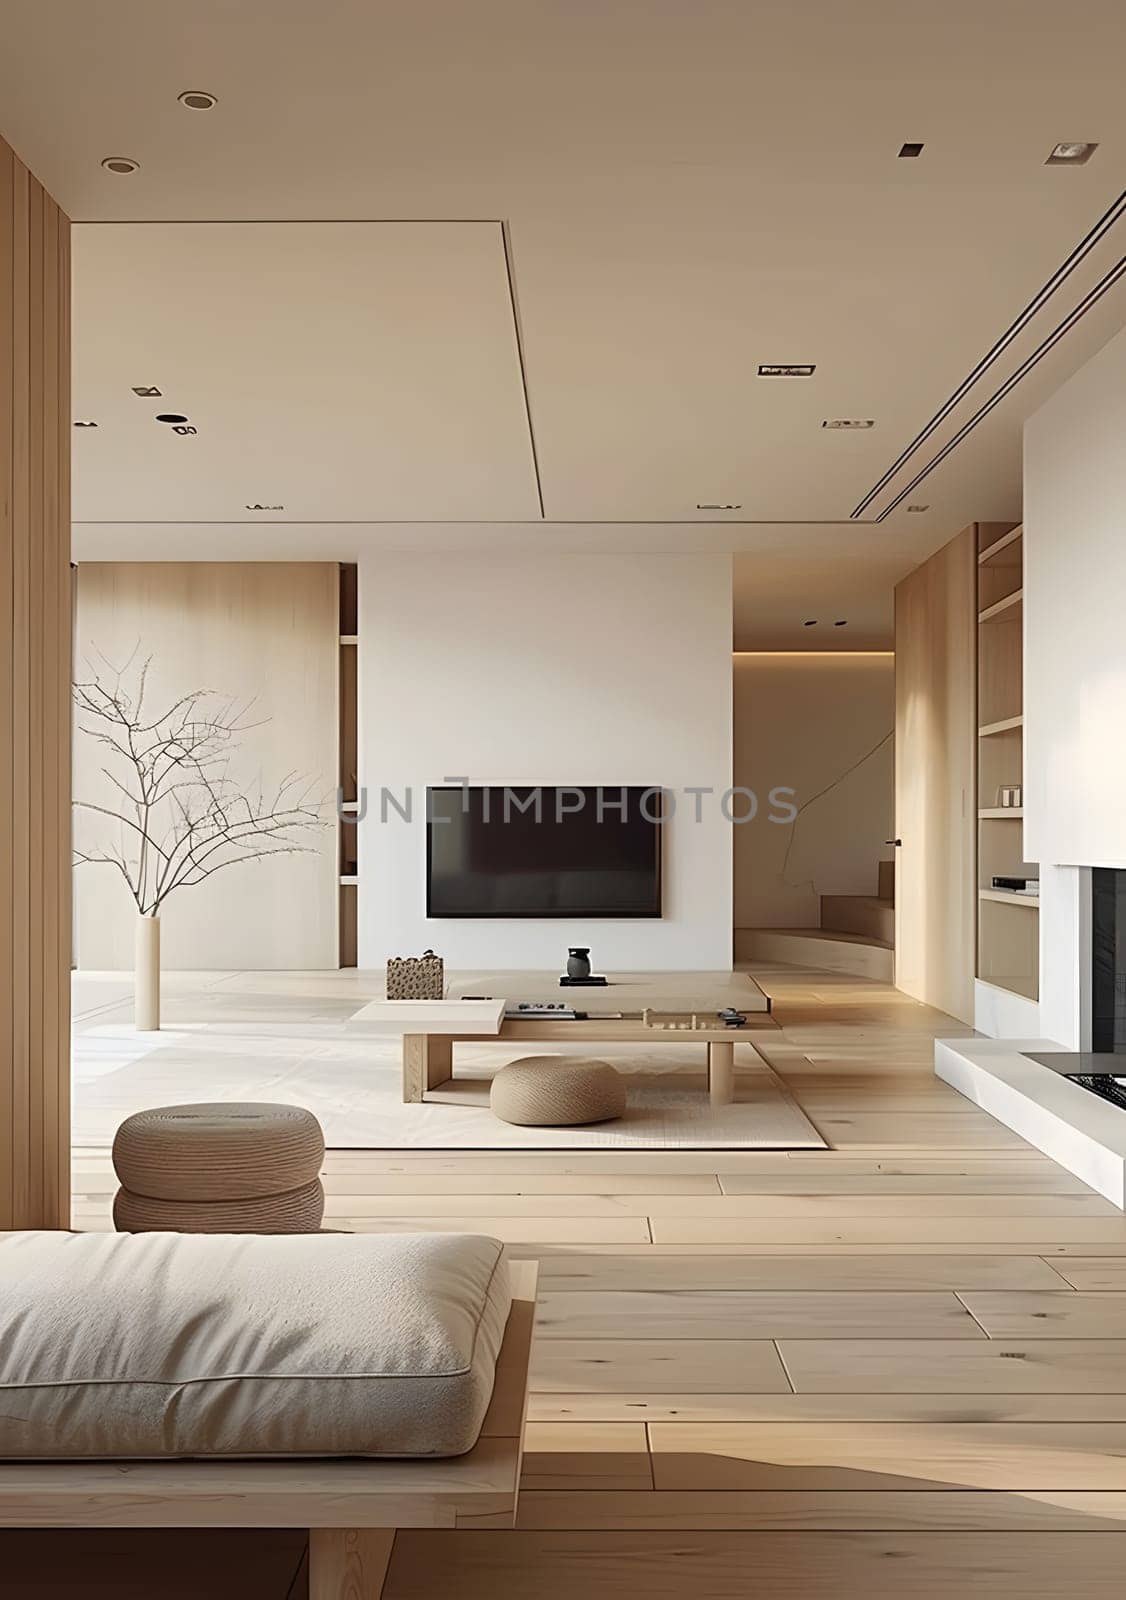 A modern living room in a building with hardwood flooring, featuring a flat screen TV mounted on the wall. Interior design highlights a rectangular shape, with a wooden ceiling